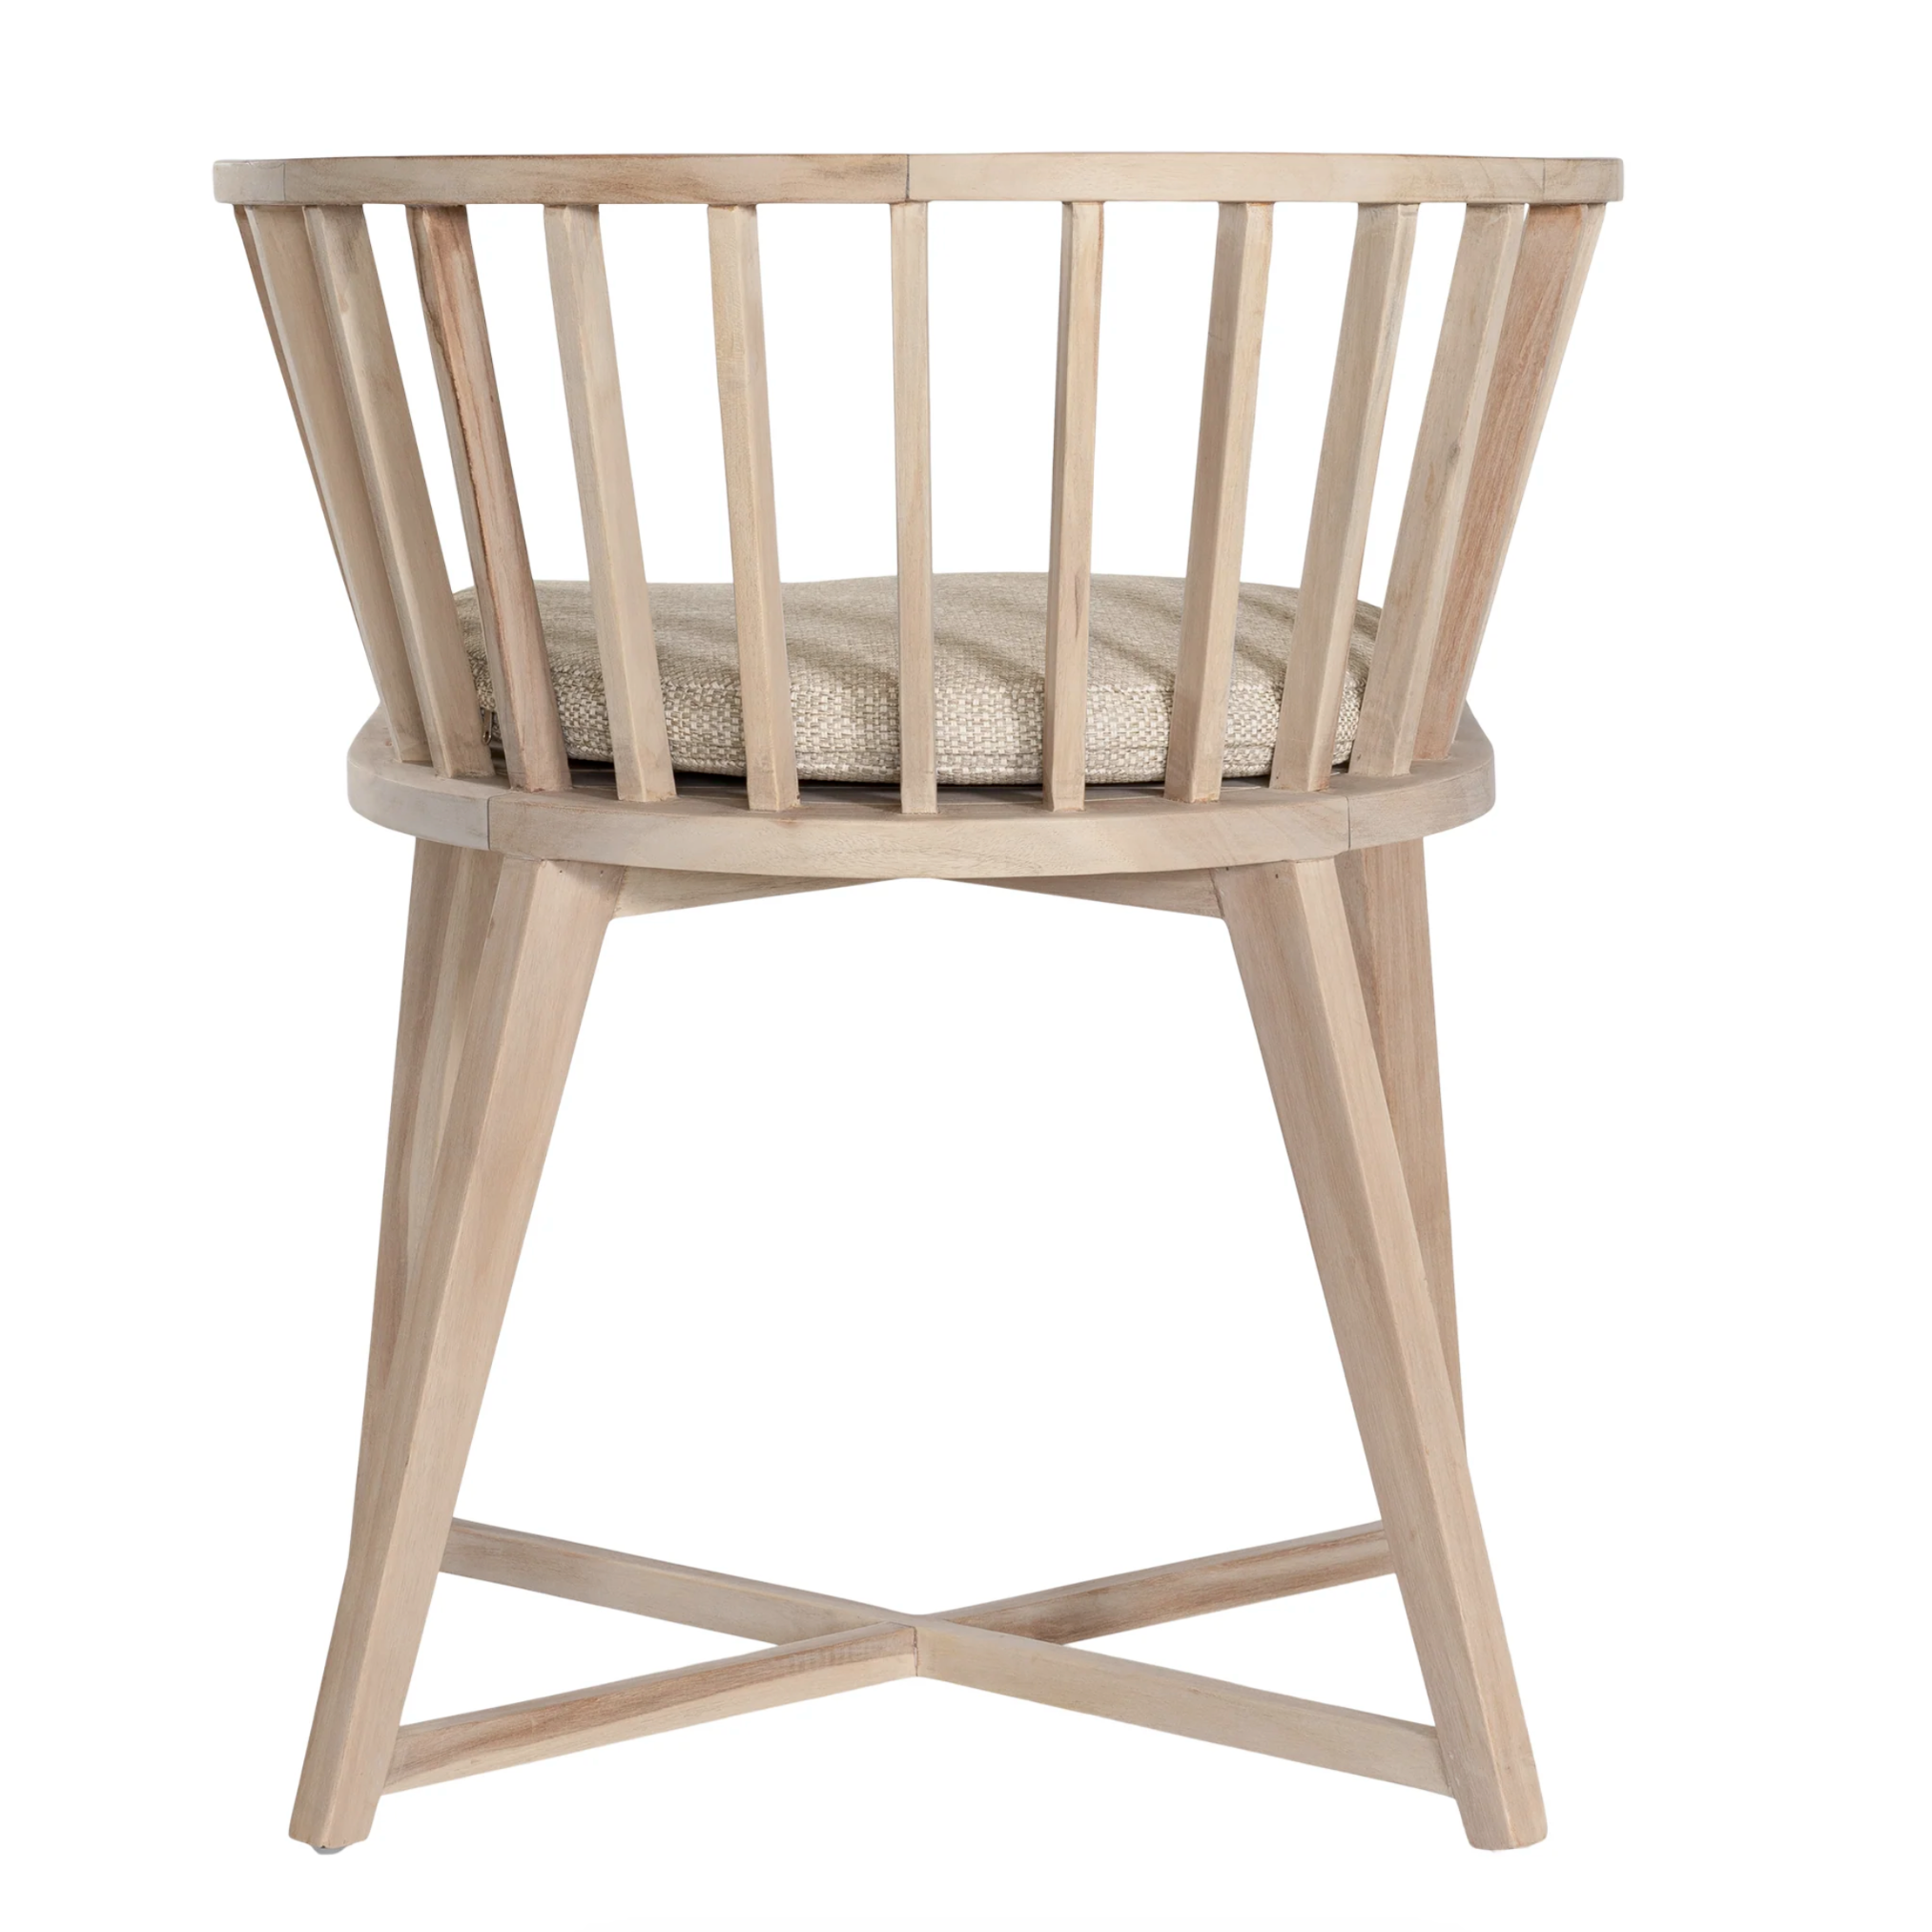 Uniqwa Seychelles Dining Chair - Natural